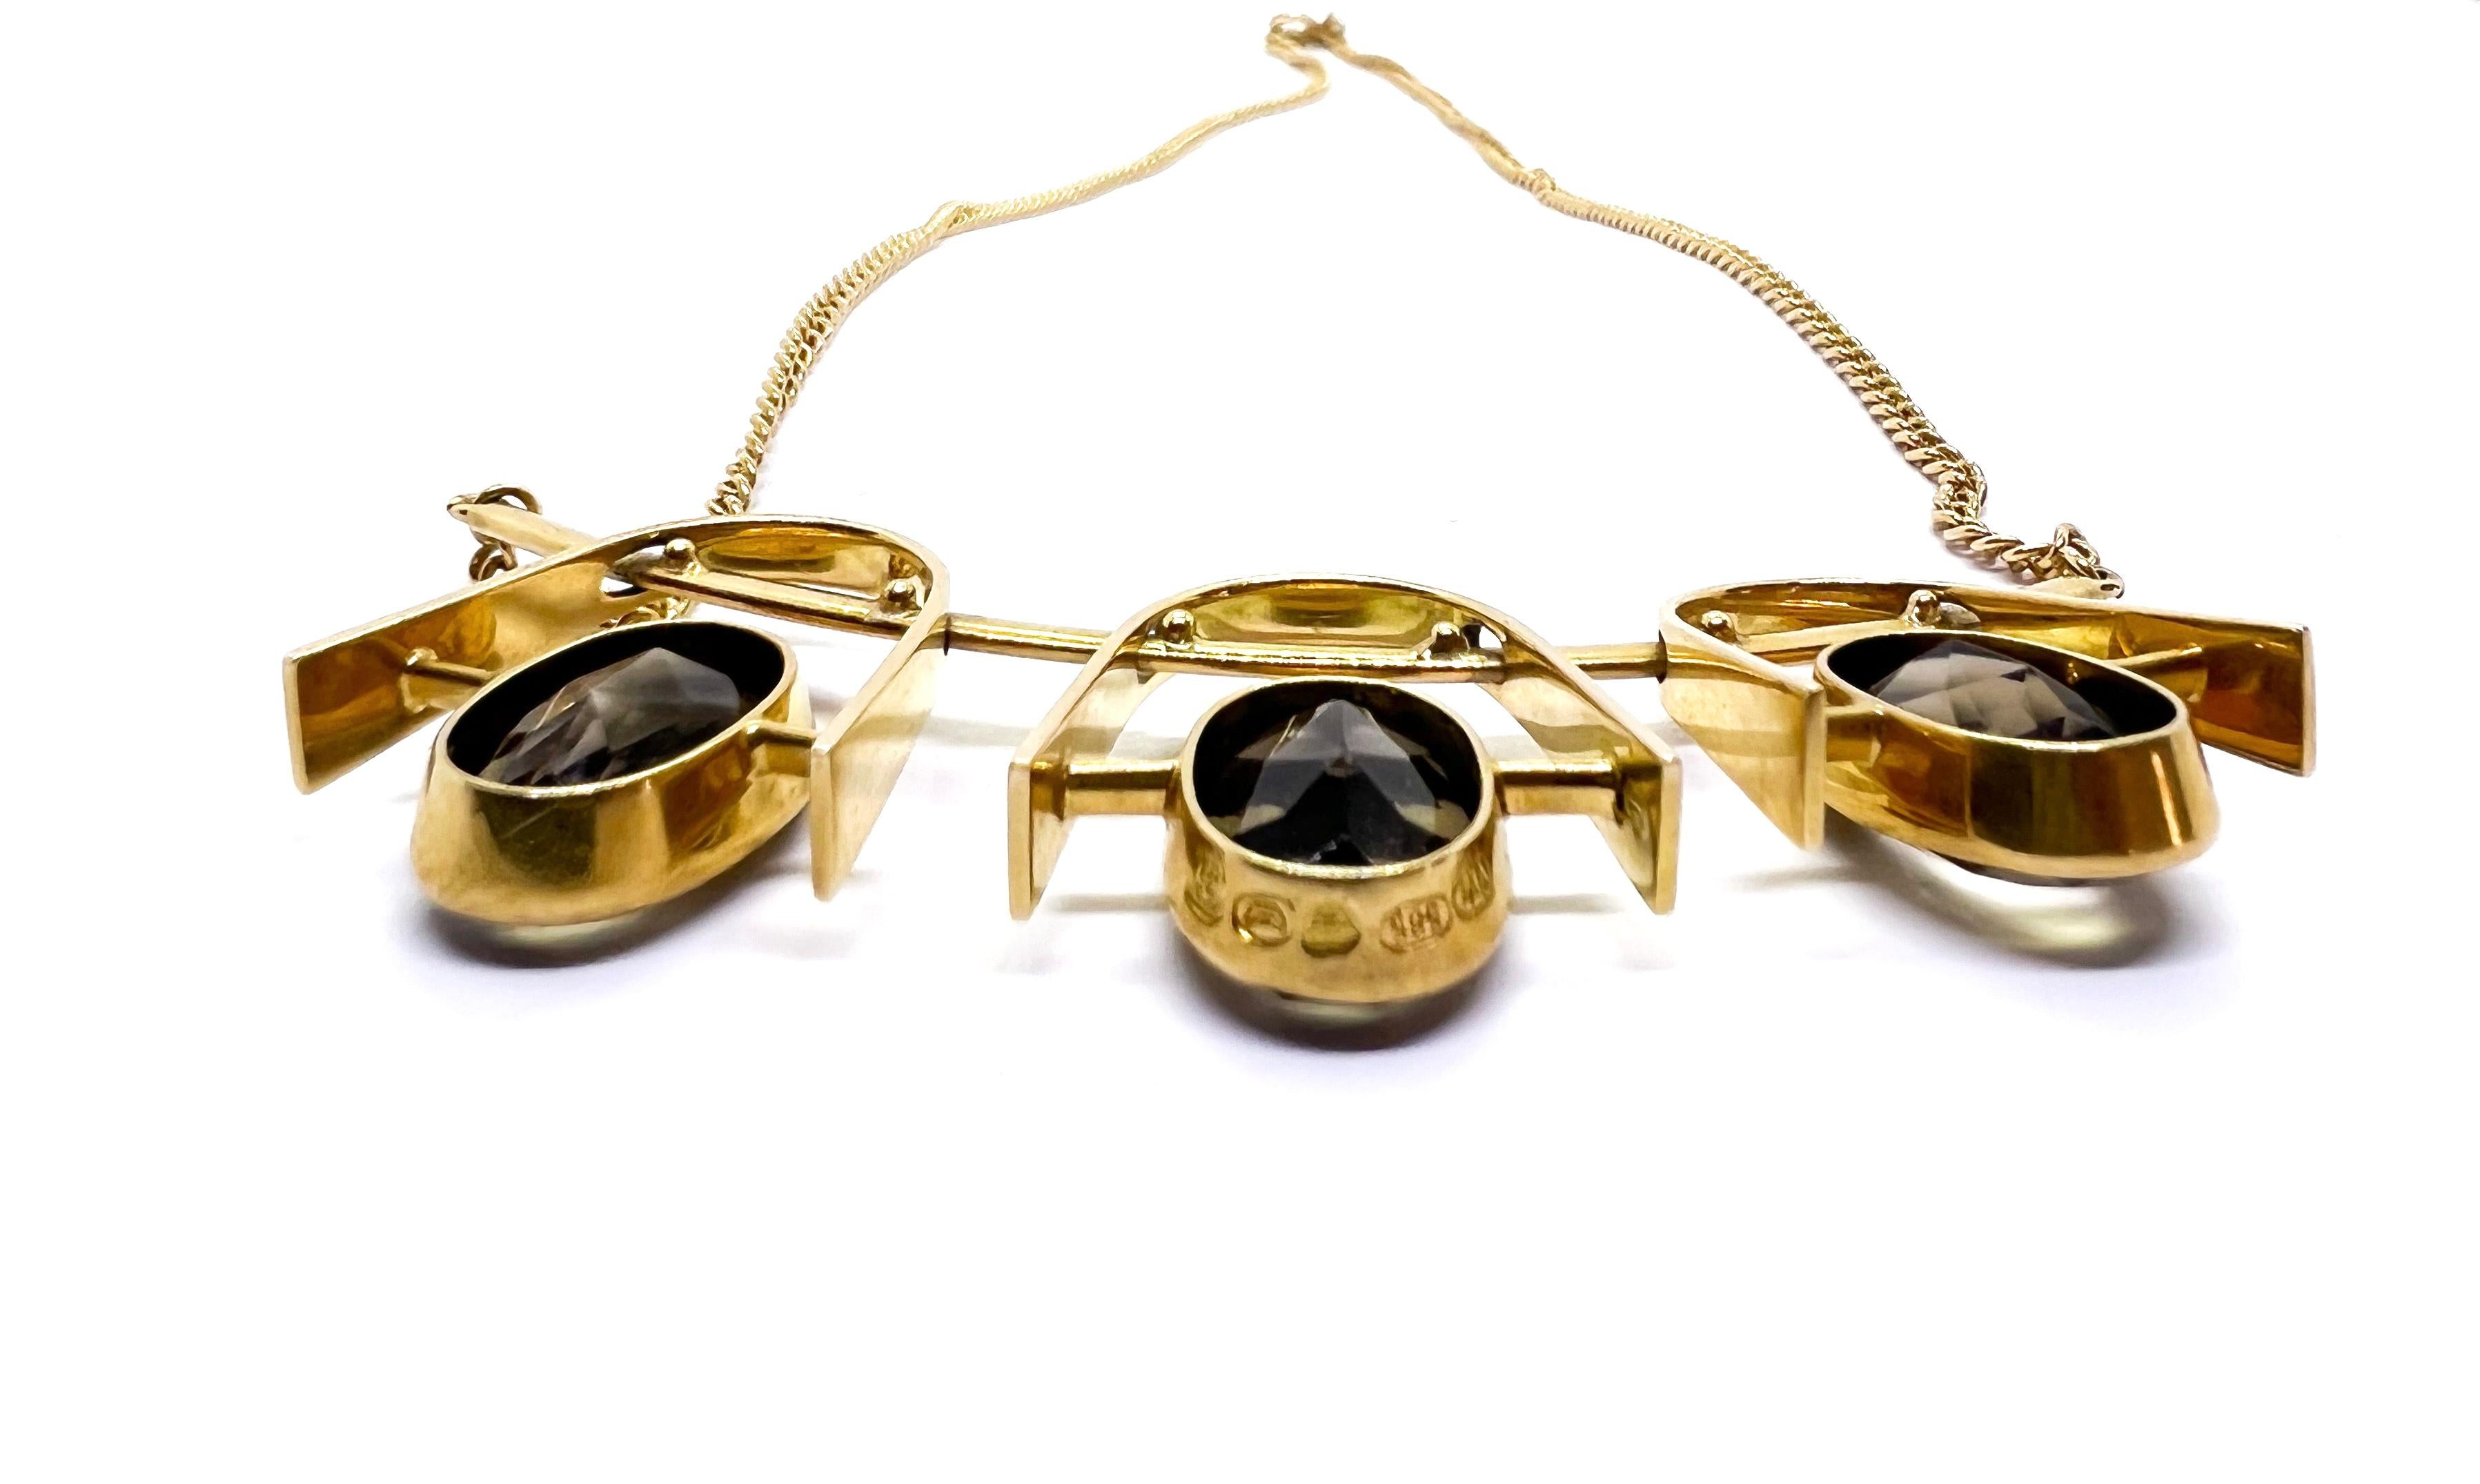 14 Karat Gold Eero Rislakki Stone Necklace 1960 Made in Finland.
585 Gold, Maker NW, Helsinki Eino Westerback.
The jewelry is in great condition, almost like new.
A very rare find.
Stones Most likely Smoky Quartz.
Length 41.5cm, weight 16.6g

A